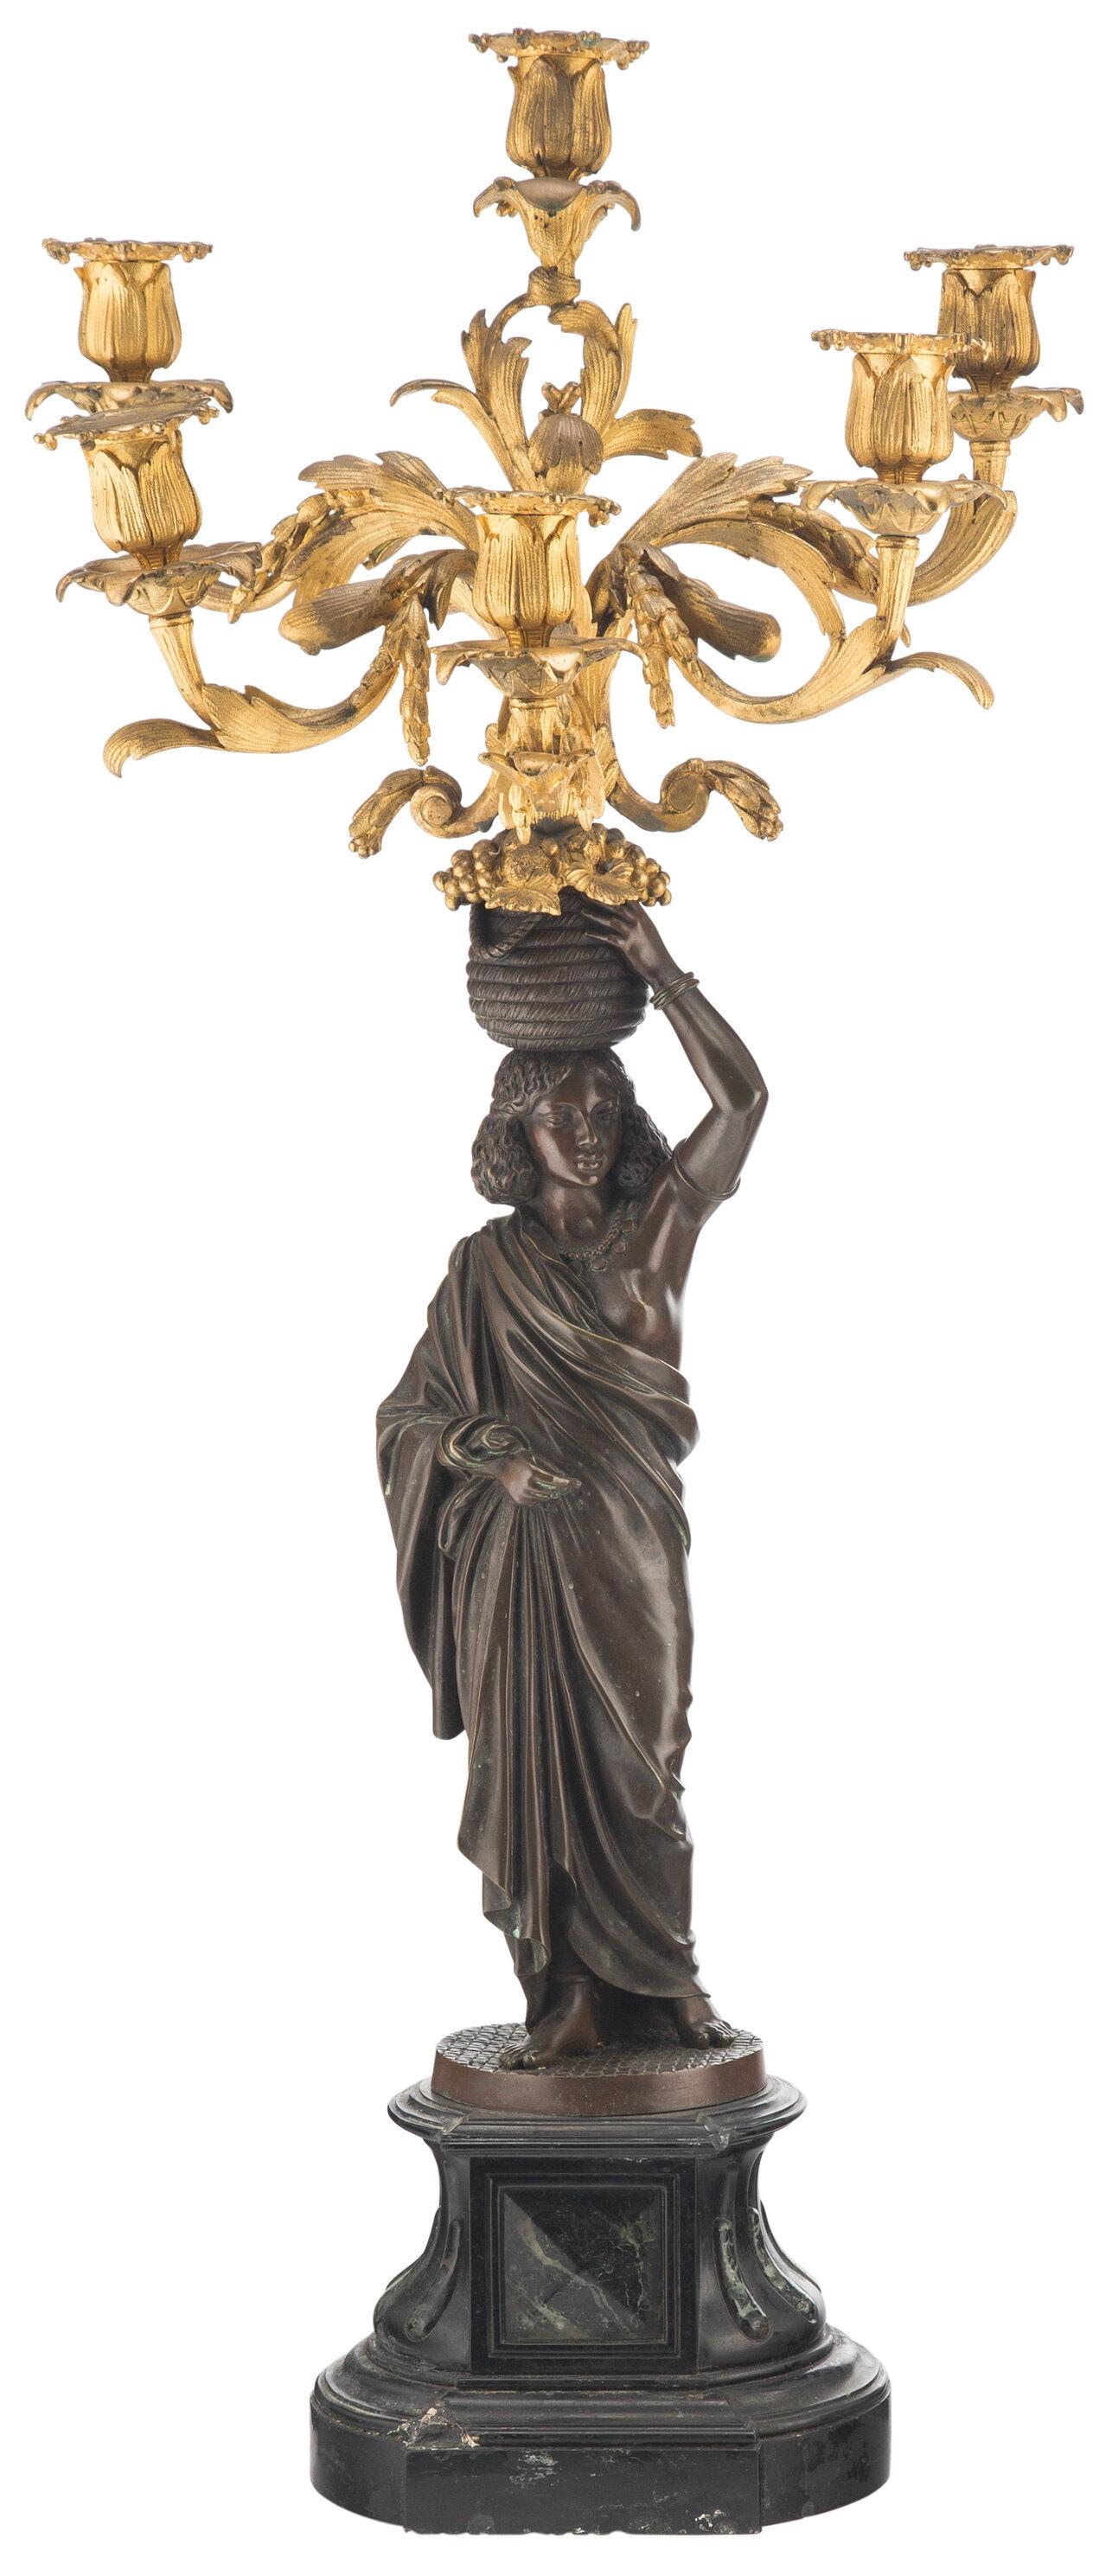 Pair of large and finest quality exotic orientalist motif French 19th century figural gilt and patinated bronze Candelabras on original marble bases.